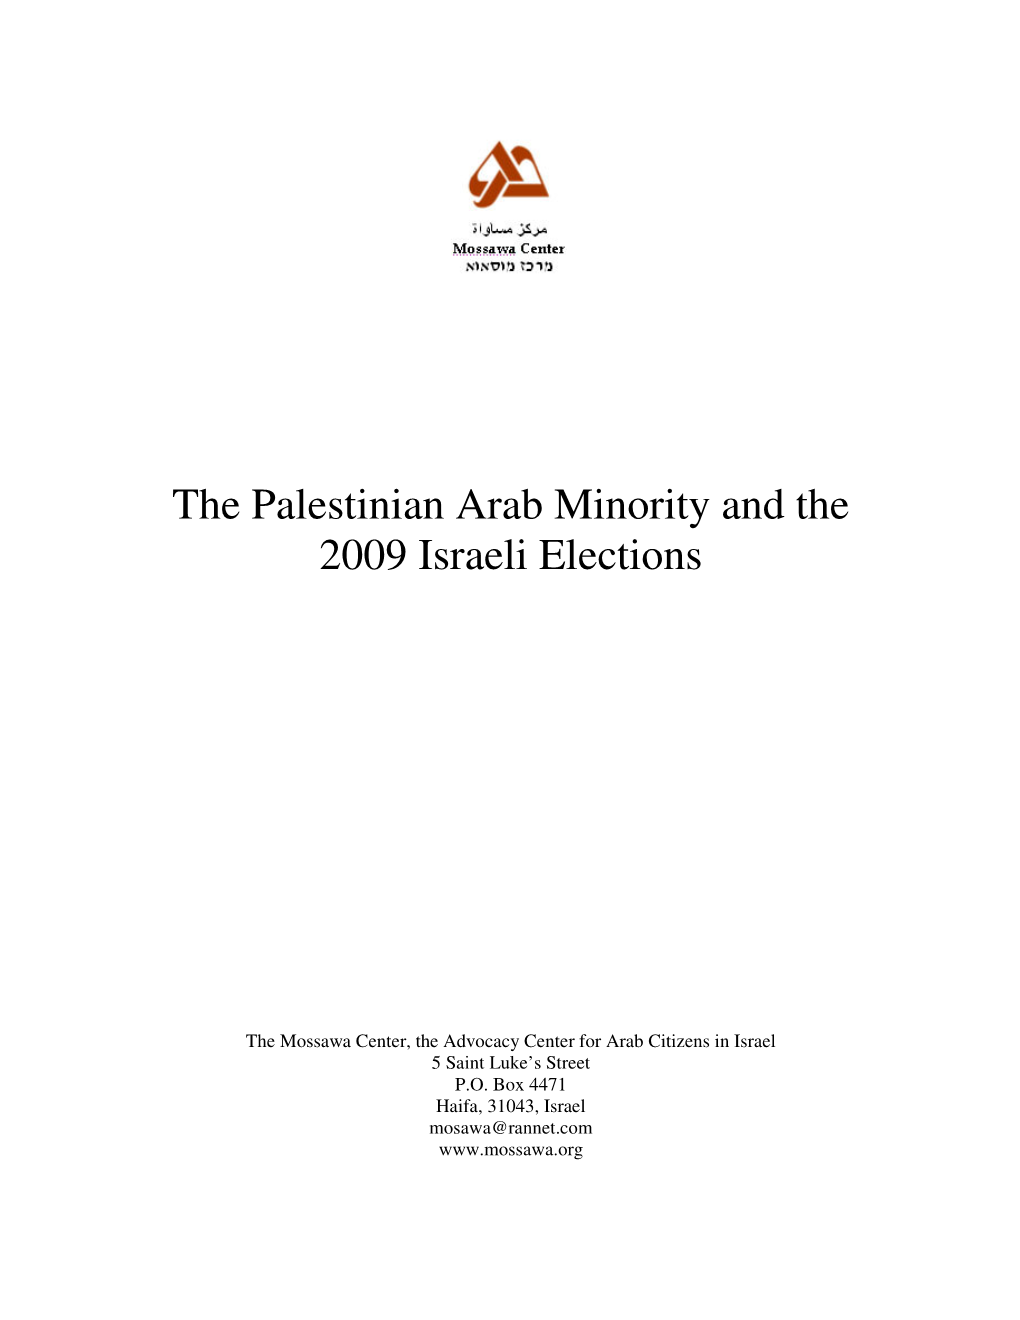 The Palestinian Arab Minority and the 2009 Israeli Elections